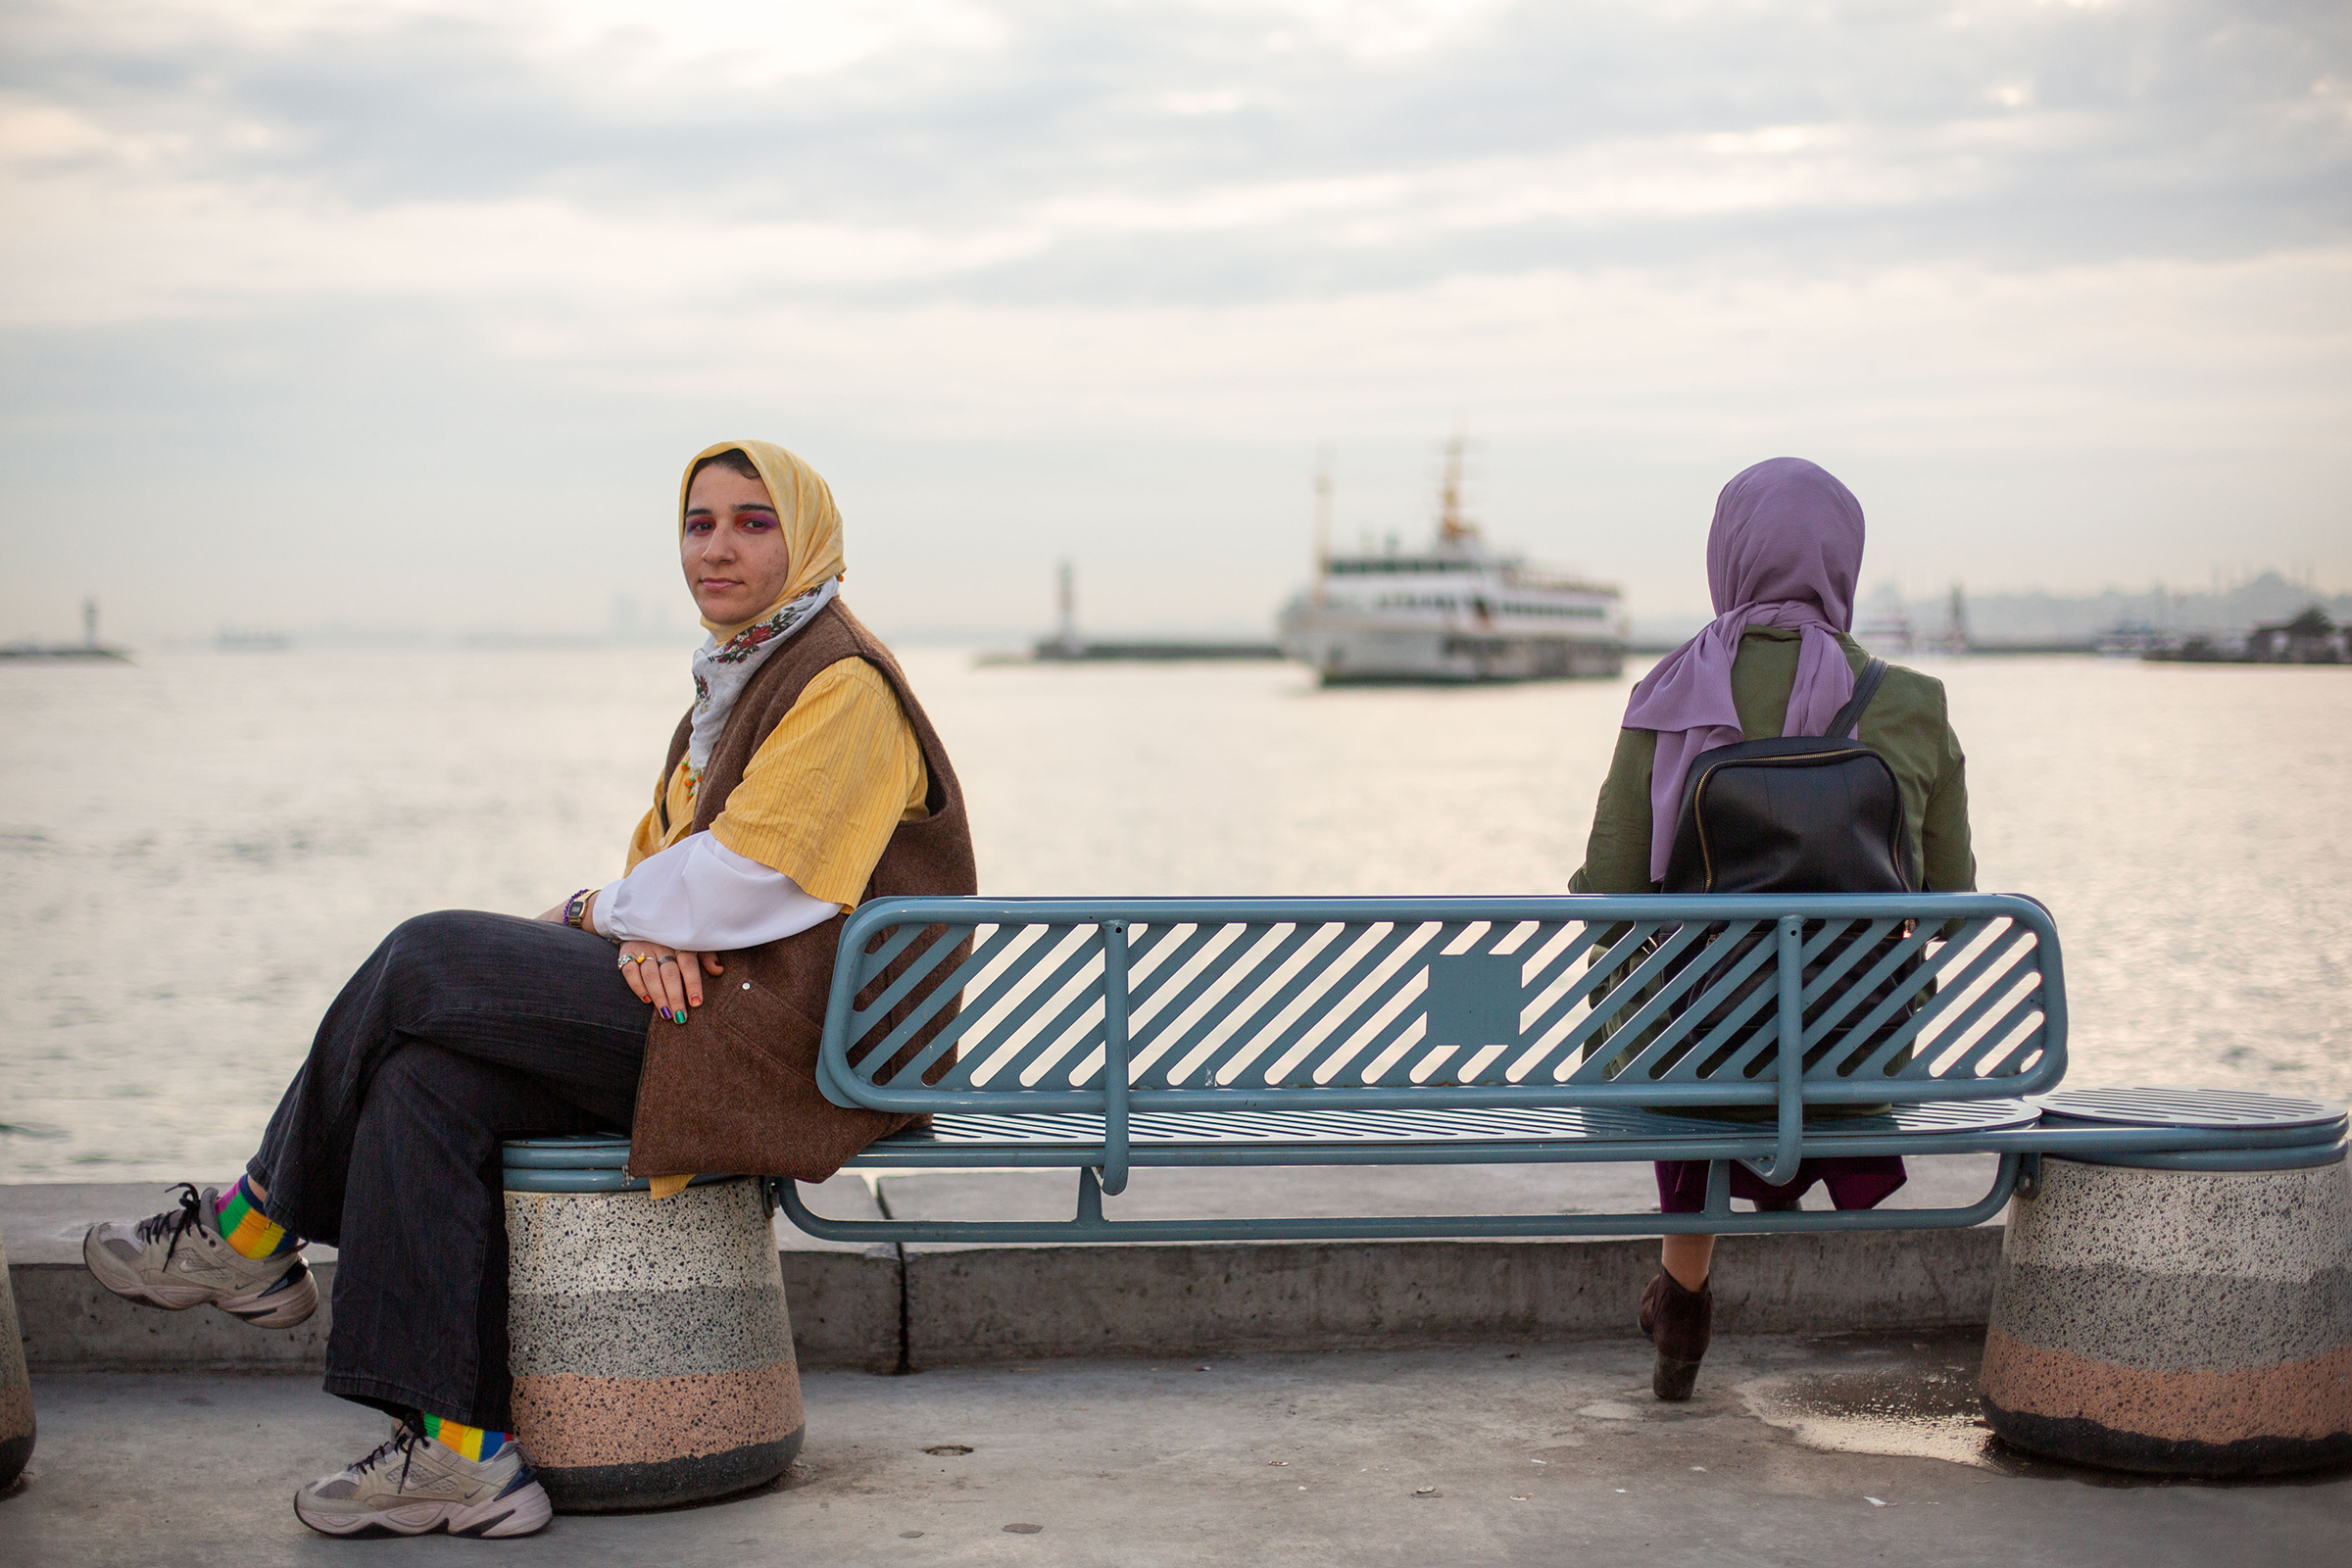 Seyma Çetin, 23, a Havle member and women’s rights activist, photographed in Istanbul in May. She says her headscarf is part of her political identity. (Özge Sebzeci for the Fuller Project)